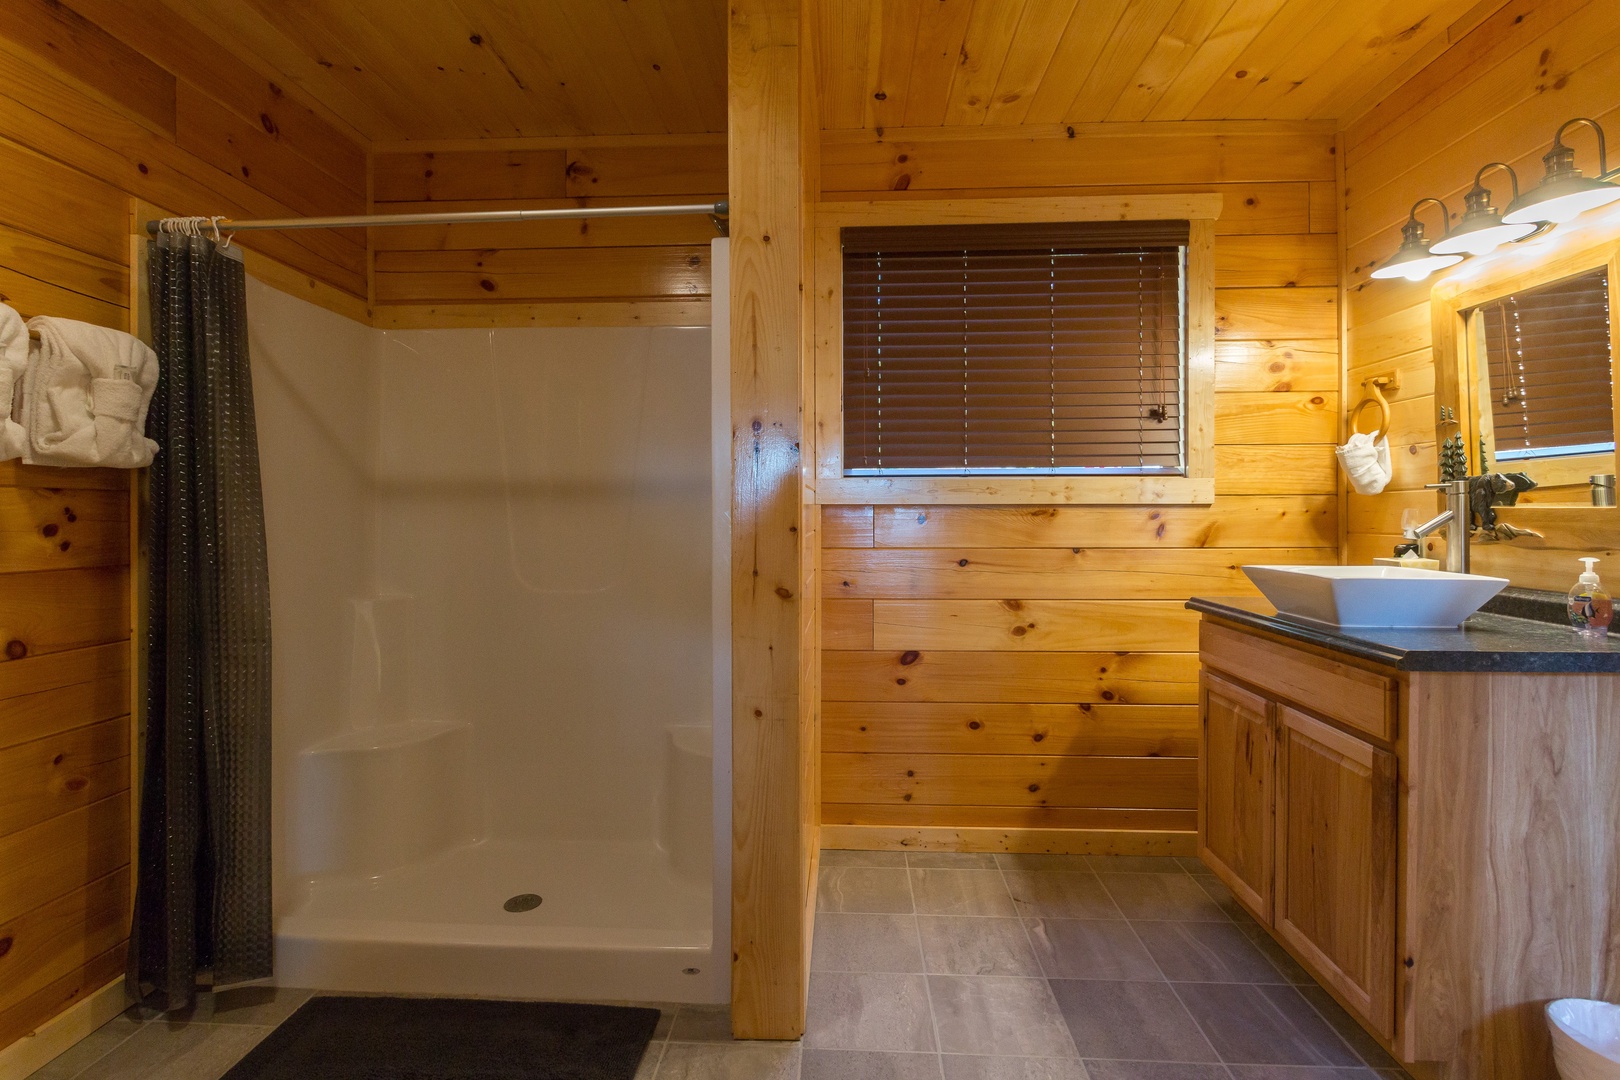 Bathroom with a shower at Canyon Camp Falls, a 2 bedroom cabin rental located in Pigeon Forge